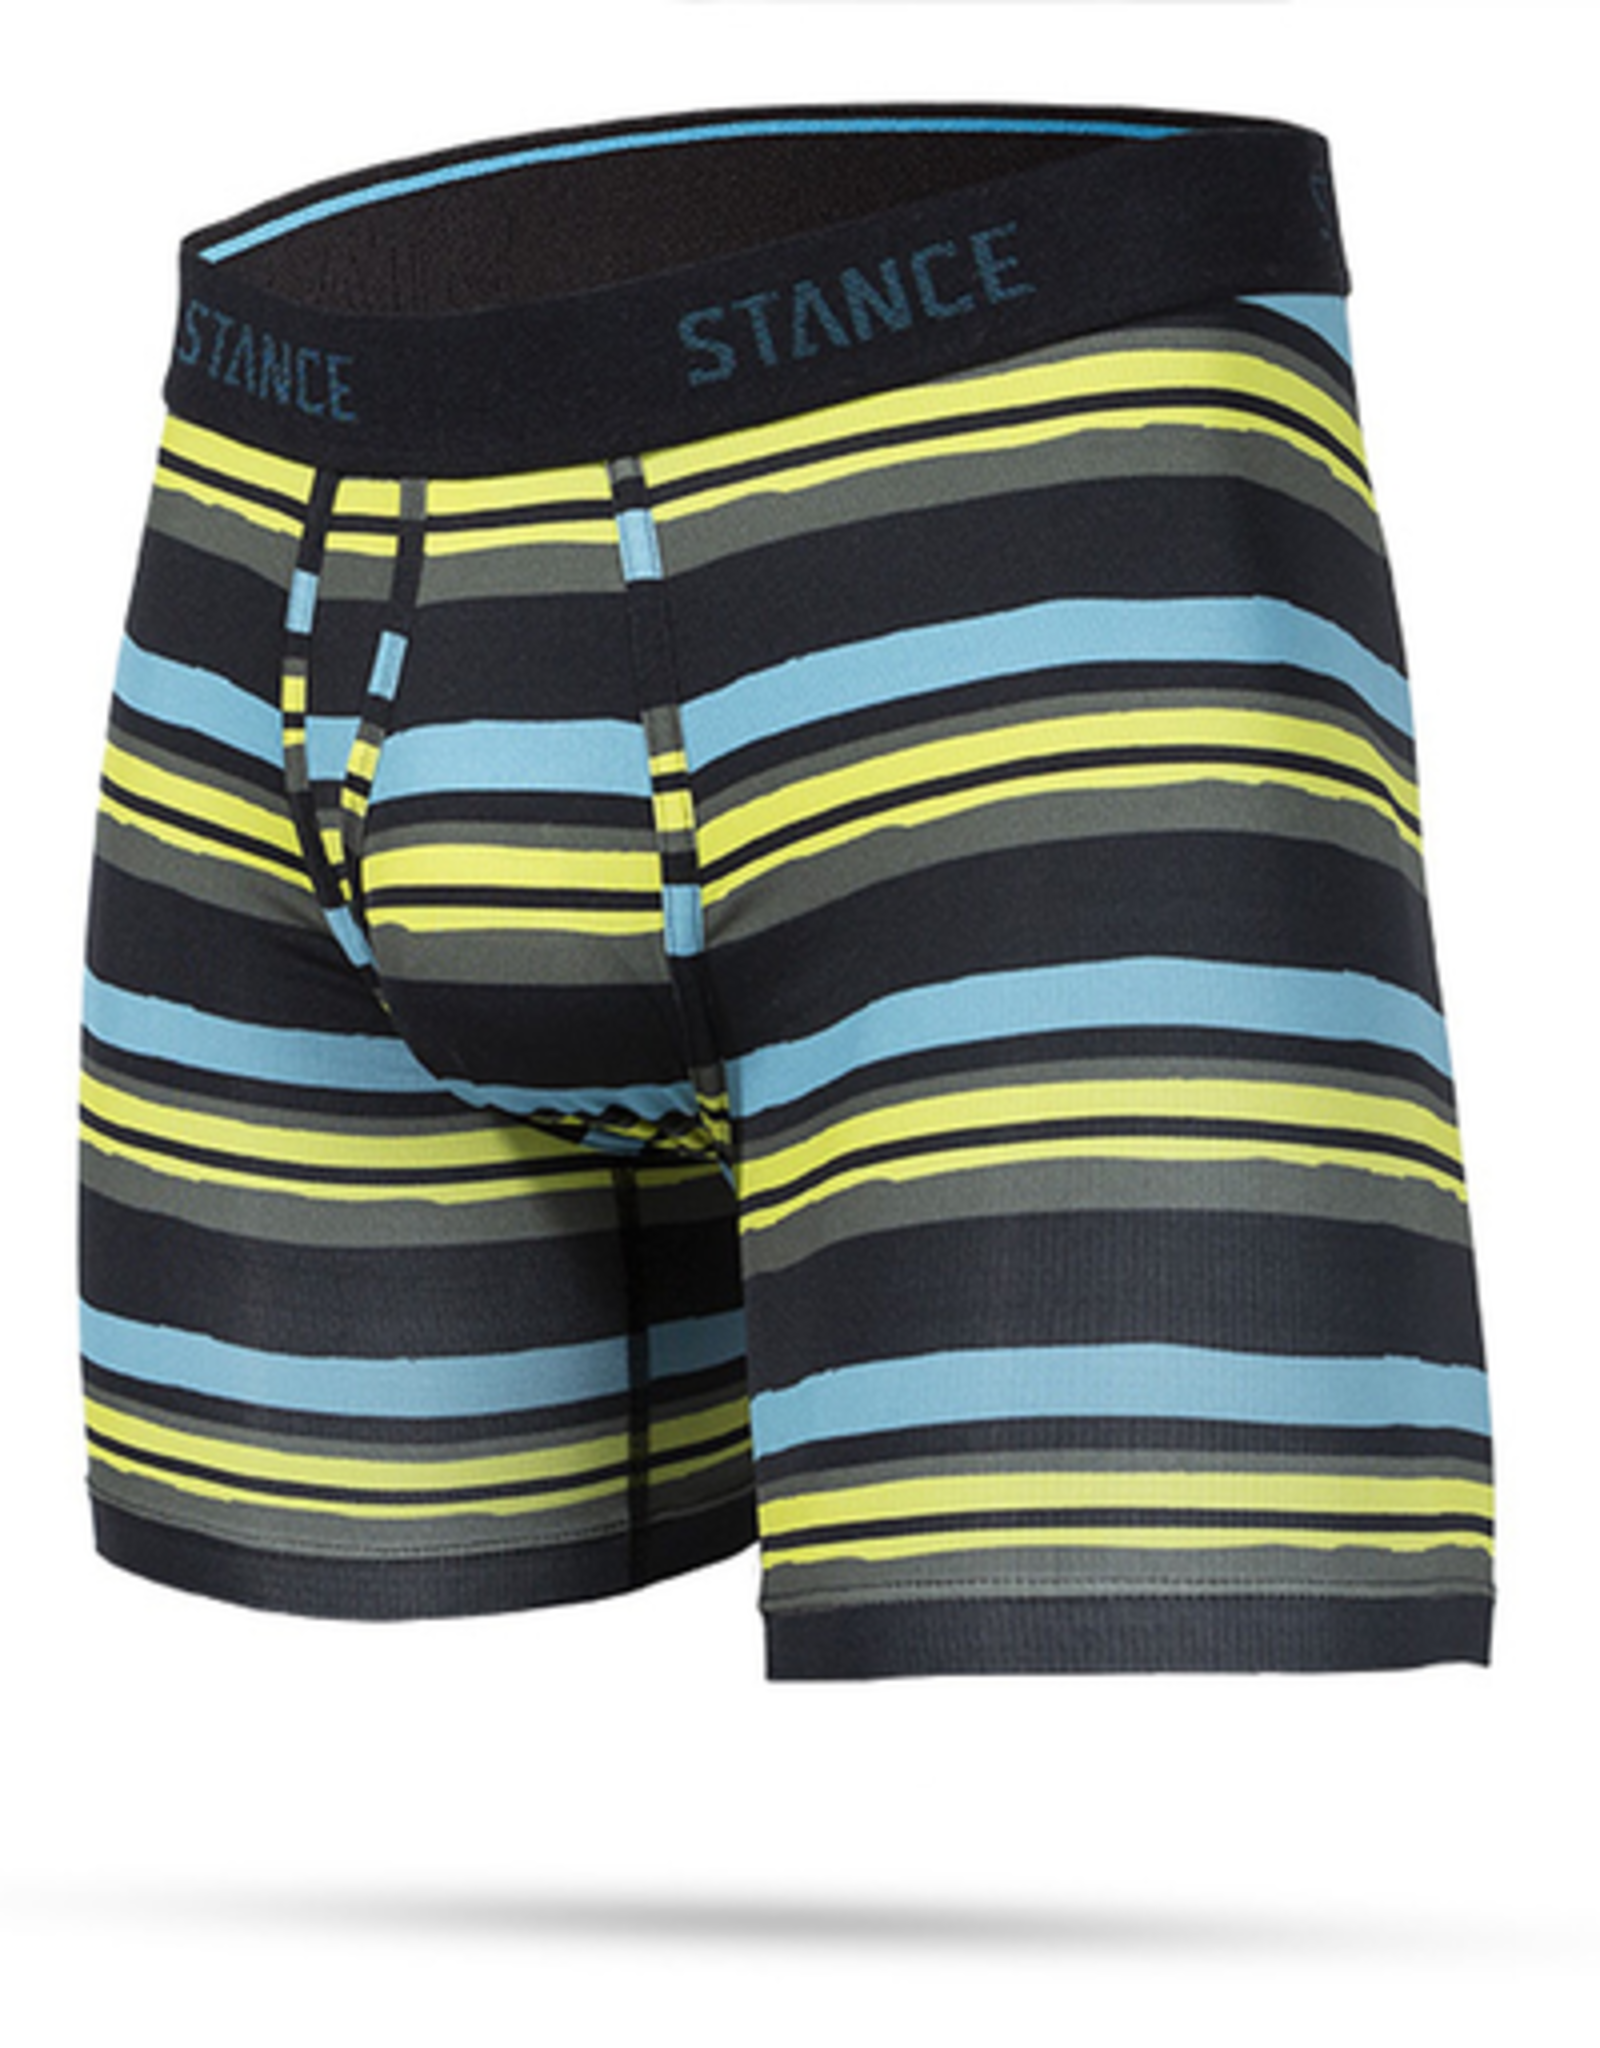 STANCE STANCE LANE LINES WHOLESTER BOXER BRIEF